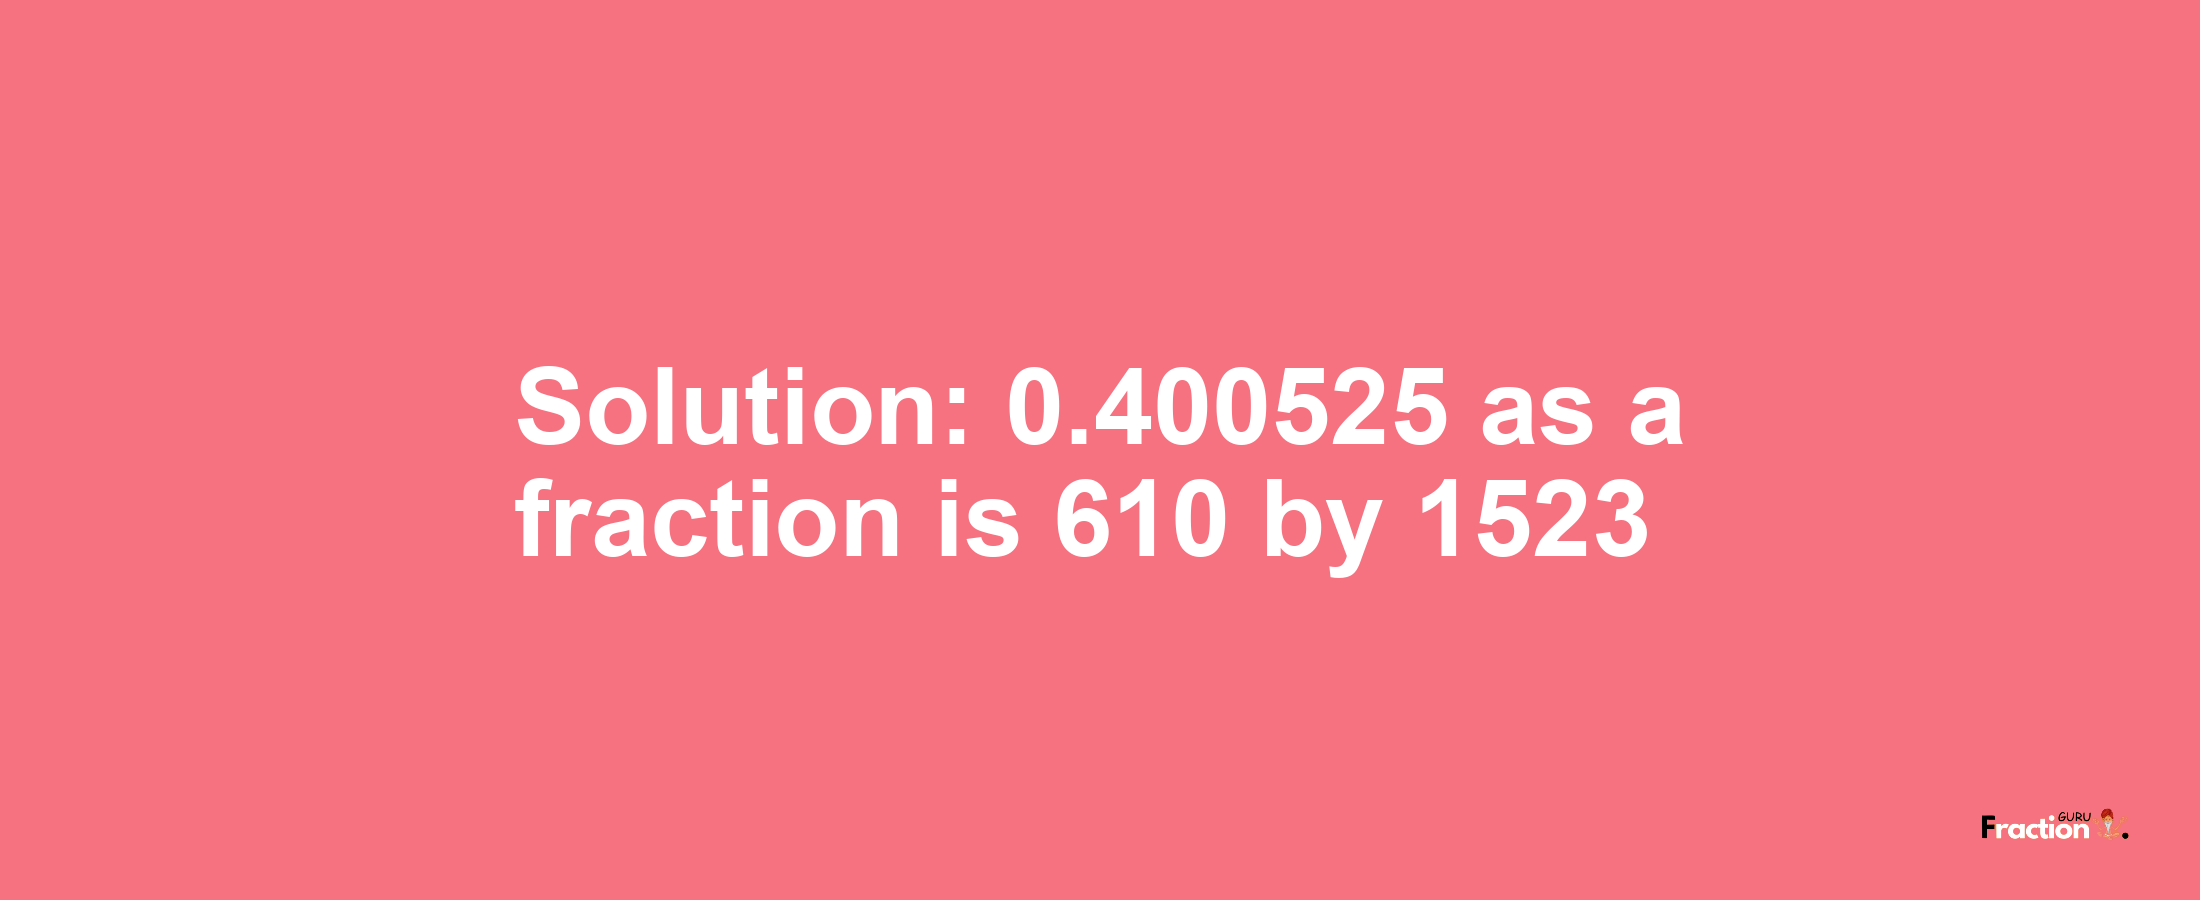 Solution:0.400525 as a fraction is 610/1523